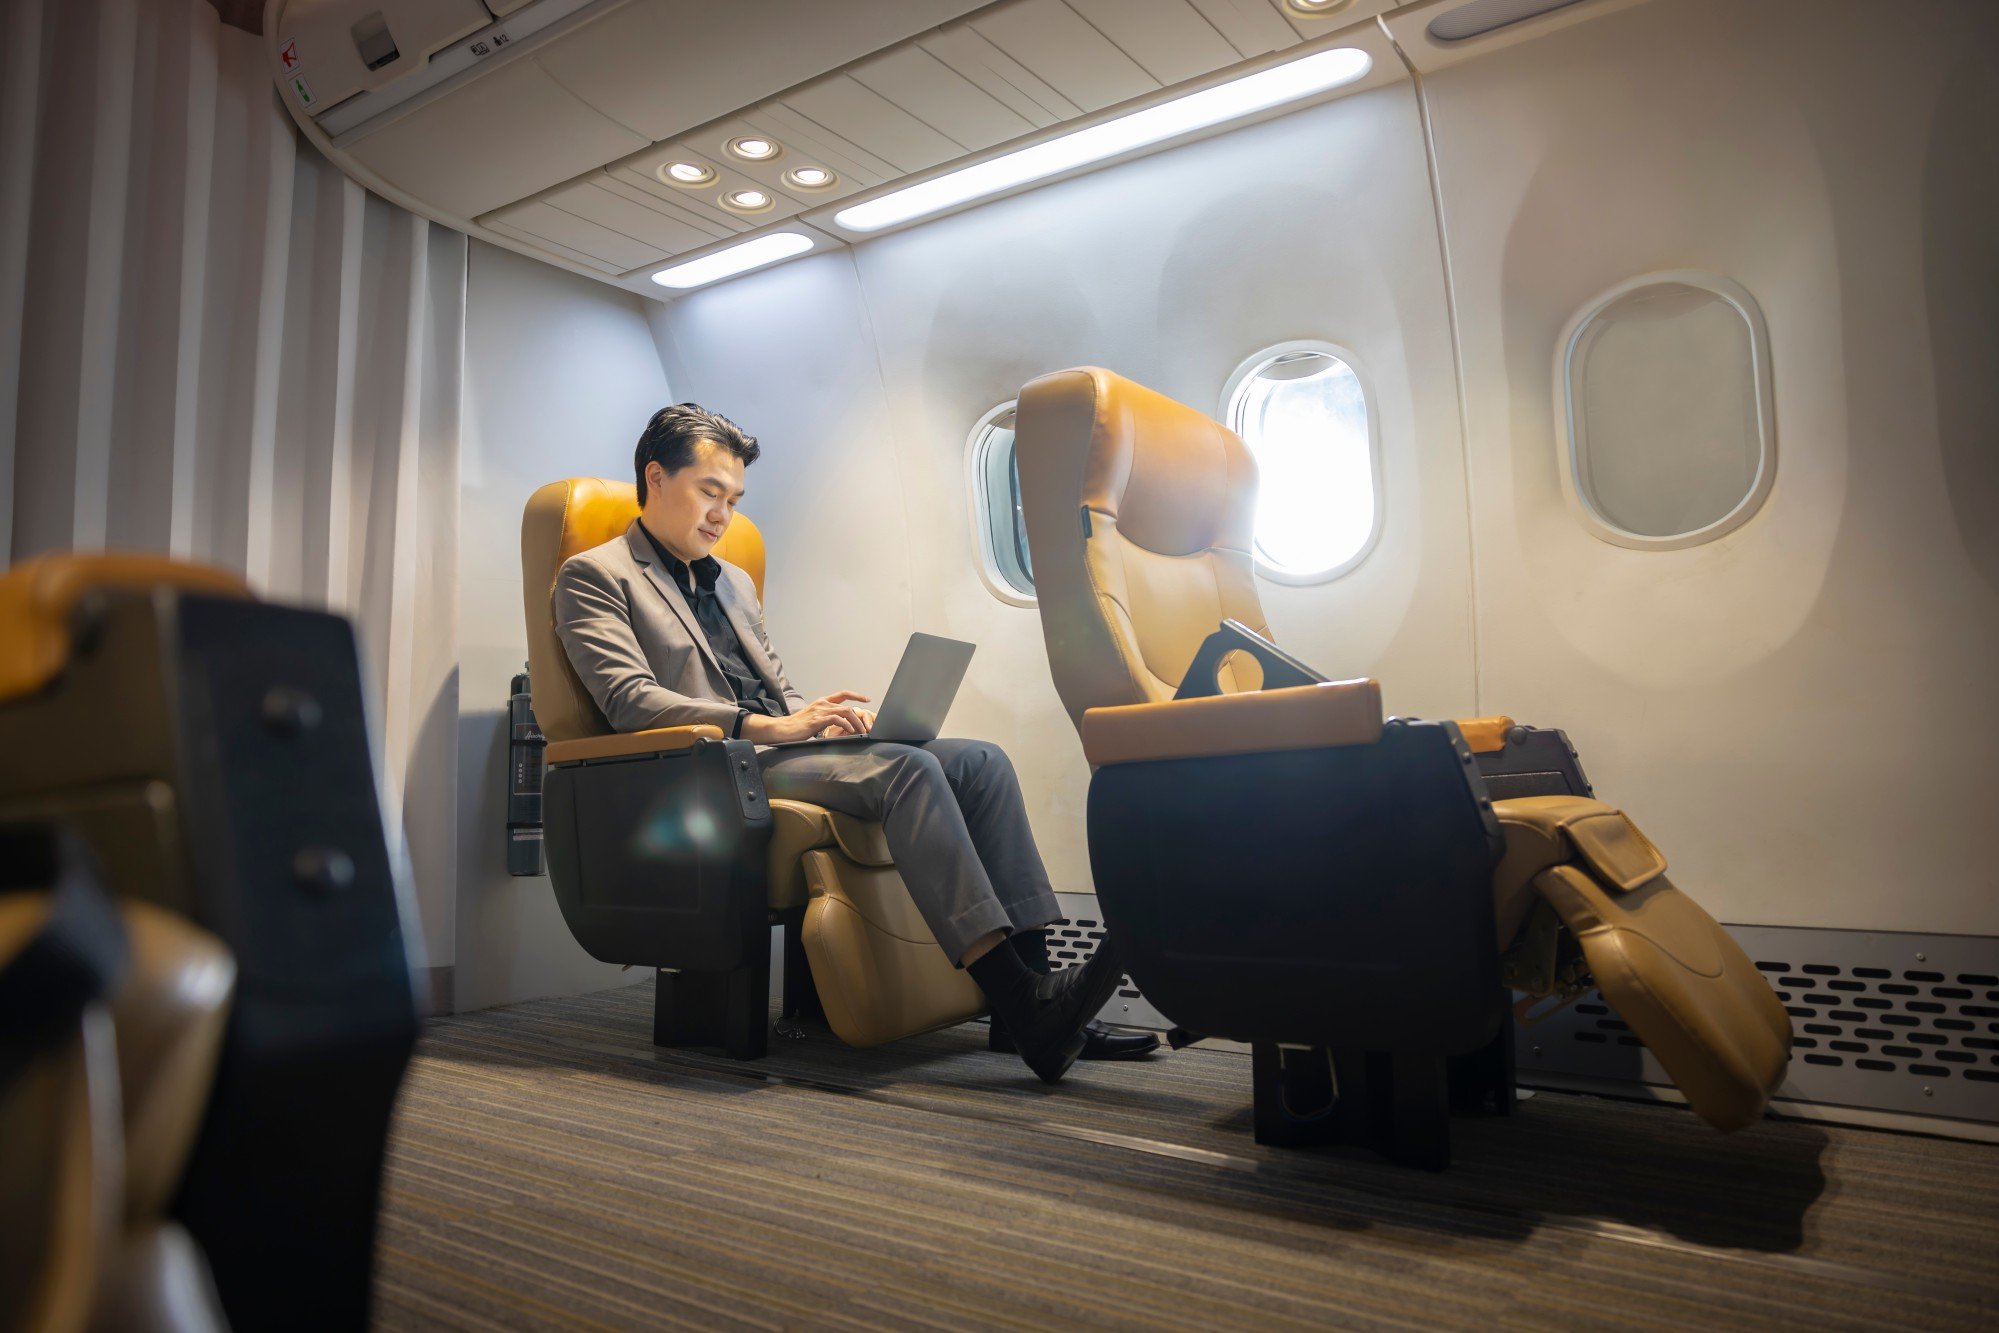 The man had bought two first-class tickets and was insistent that this should entitle him to a third seat for free. Photo: Shutterstock